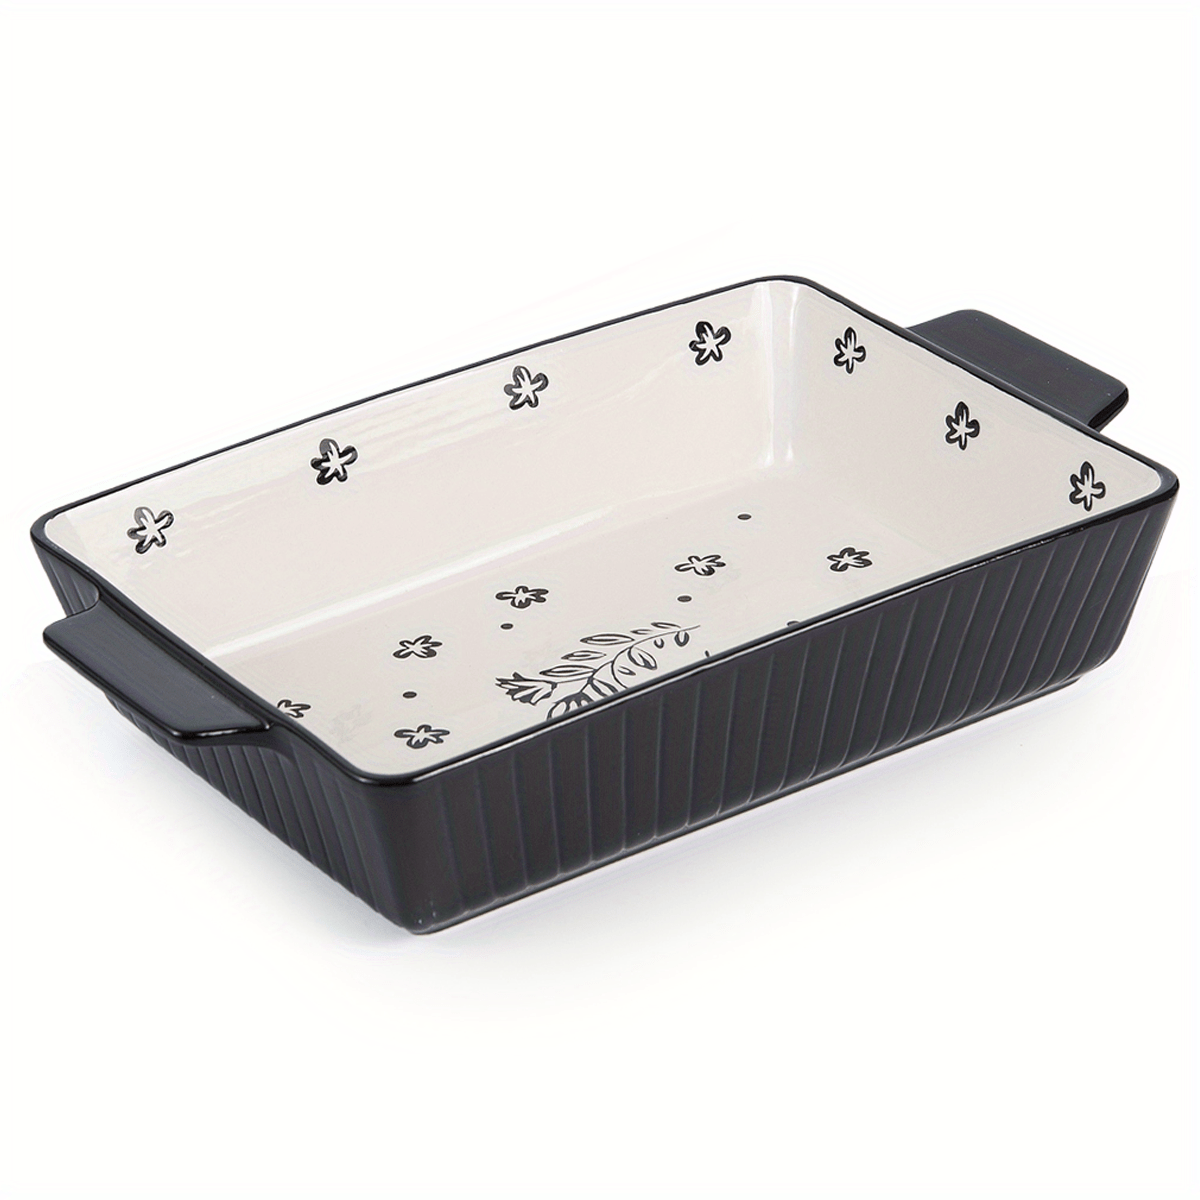 1pc Casserole Dishes For Oven Baking Dish Ceramic Casserole Dish Lasagna  Pan Baking Dishes For Oven Baking Dish Set 6''x8